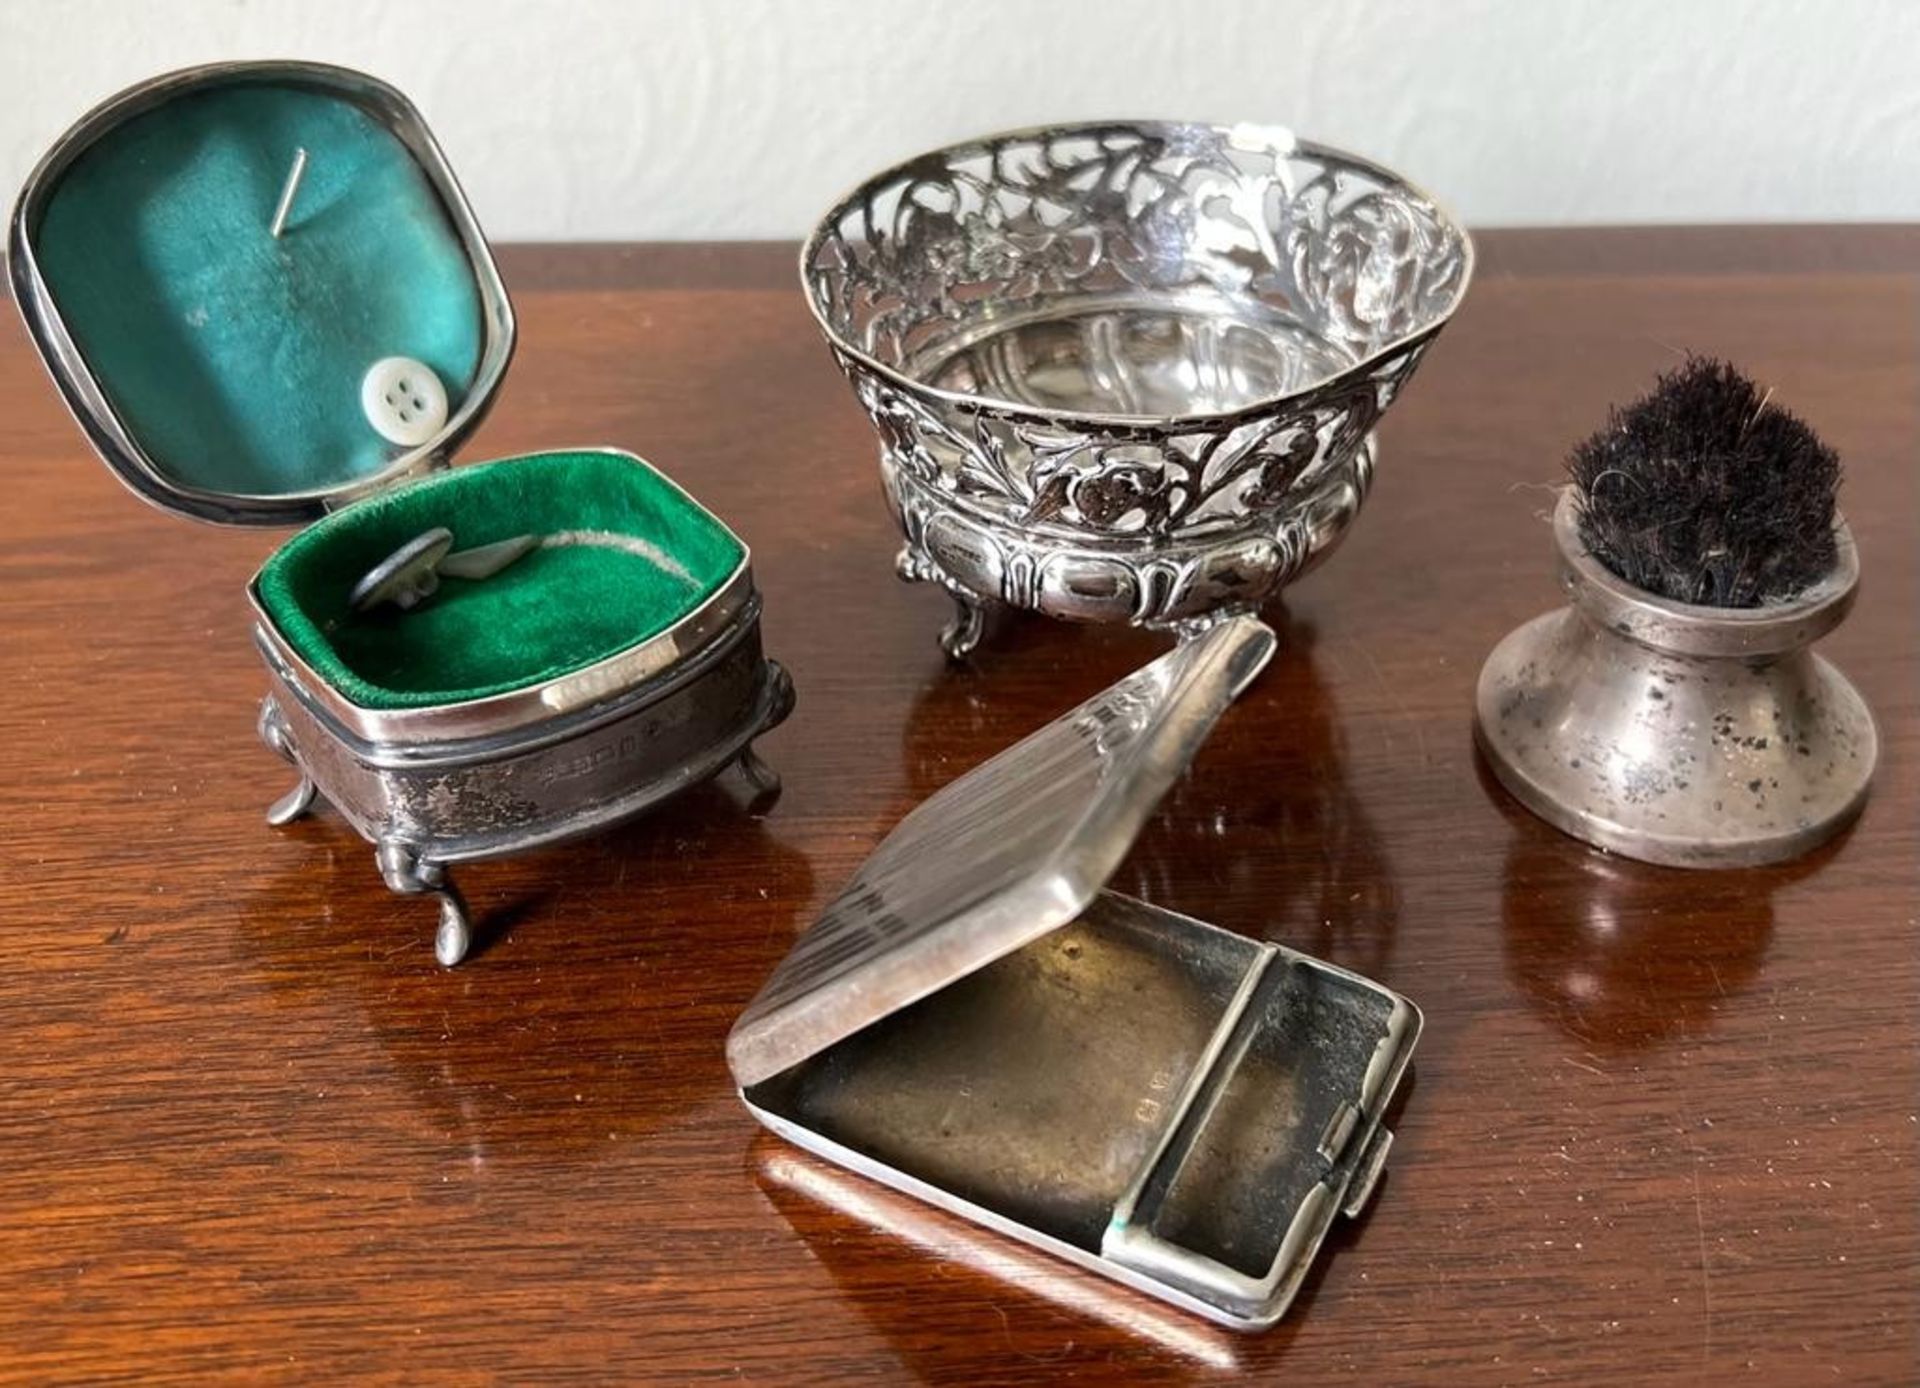 SMALL SILVER PIERCED BOWL, SILVER RING BOX, SILVER MATCHBOX HOLDER AND SILVER NIB BRUSH - Image 2 of 6